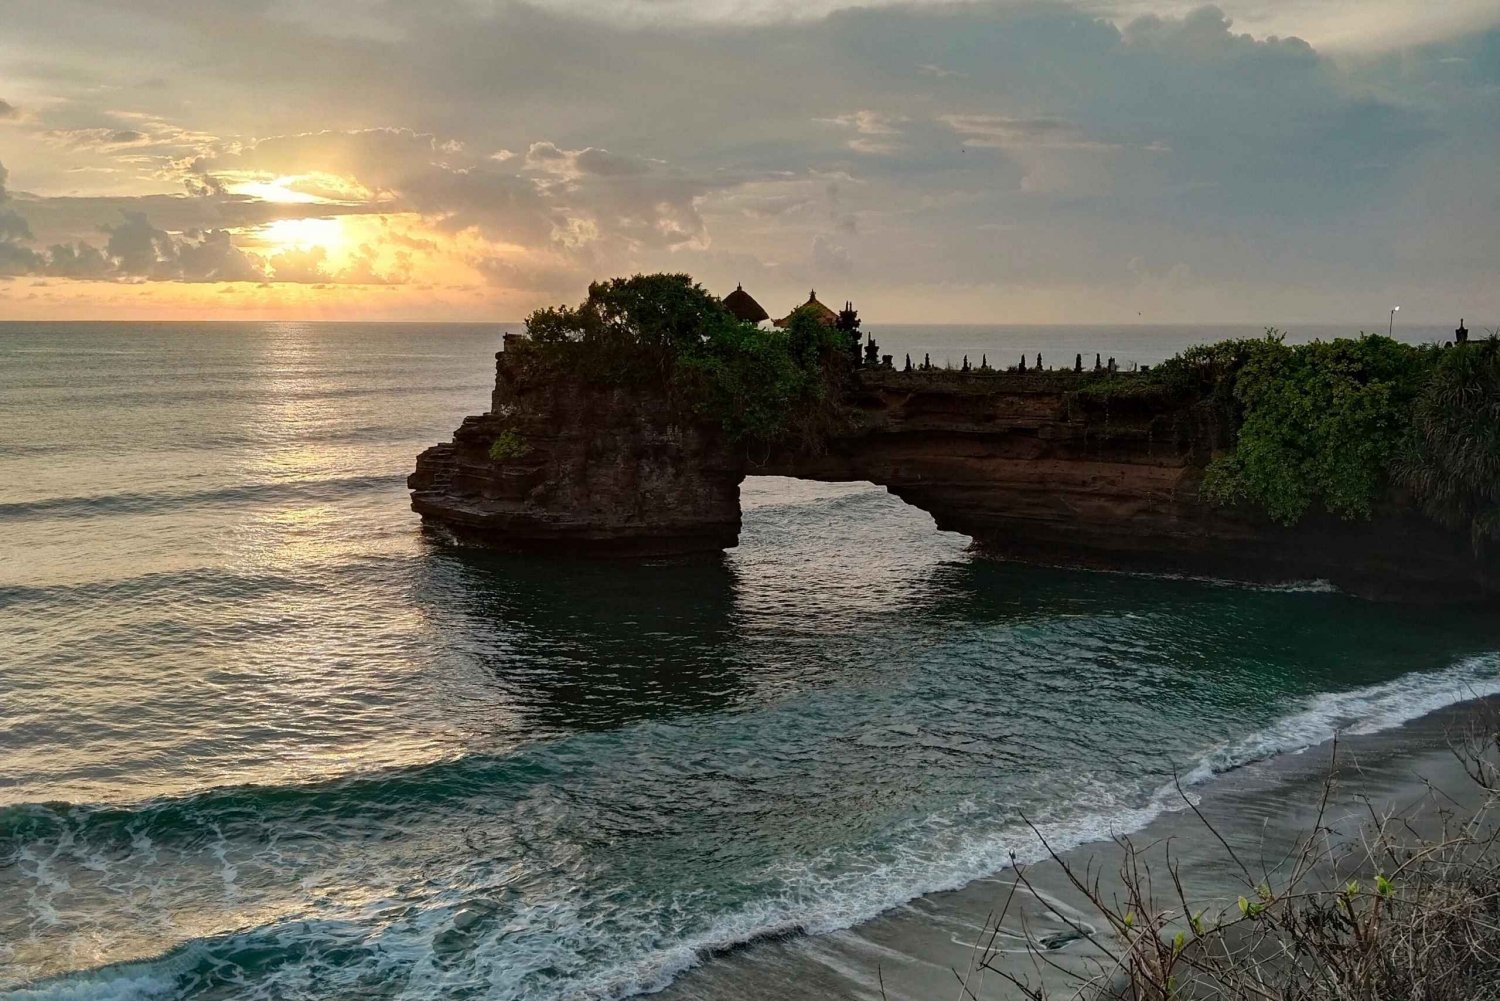 Bali sunset: tanah lot temple with complementary drink